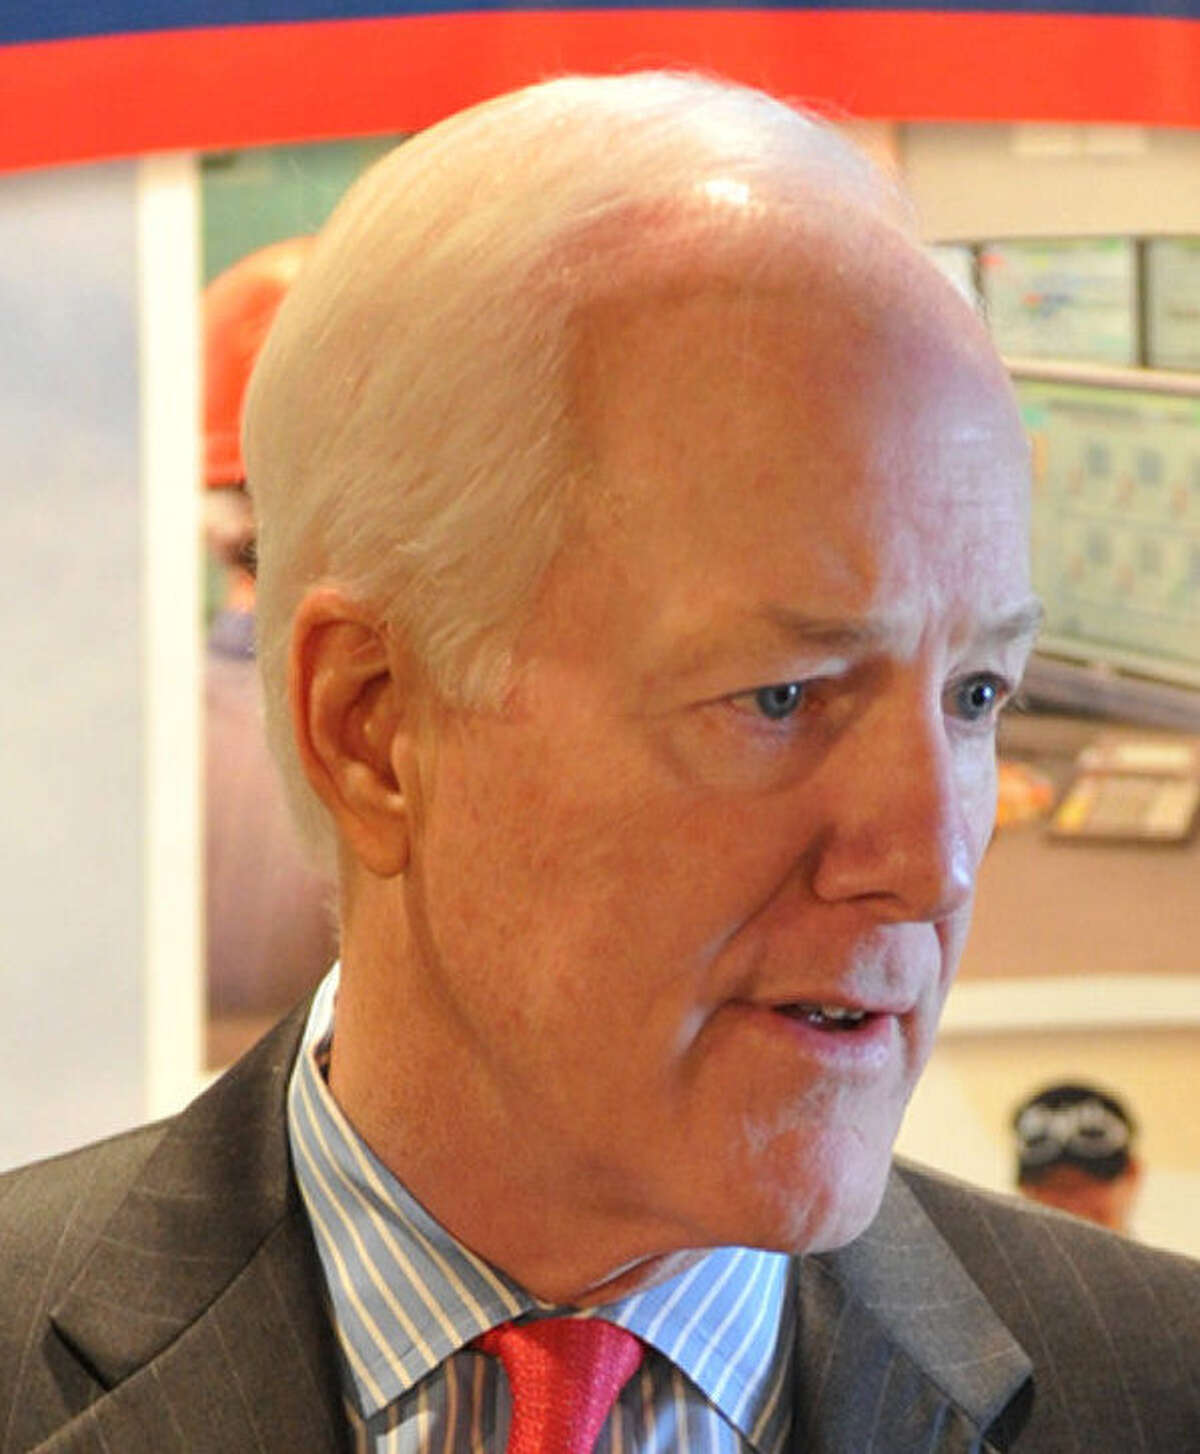 Sen. John Cornyn, R-Texas, is the clear choice for the GOP's U.S. Senate nomination in Texas. Cornyn's conservative credentials are genuine, despite what challengers say.